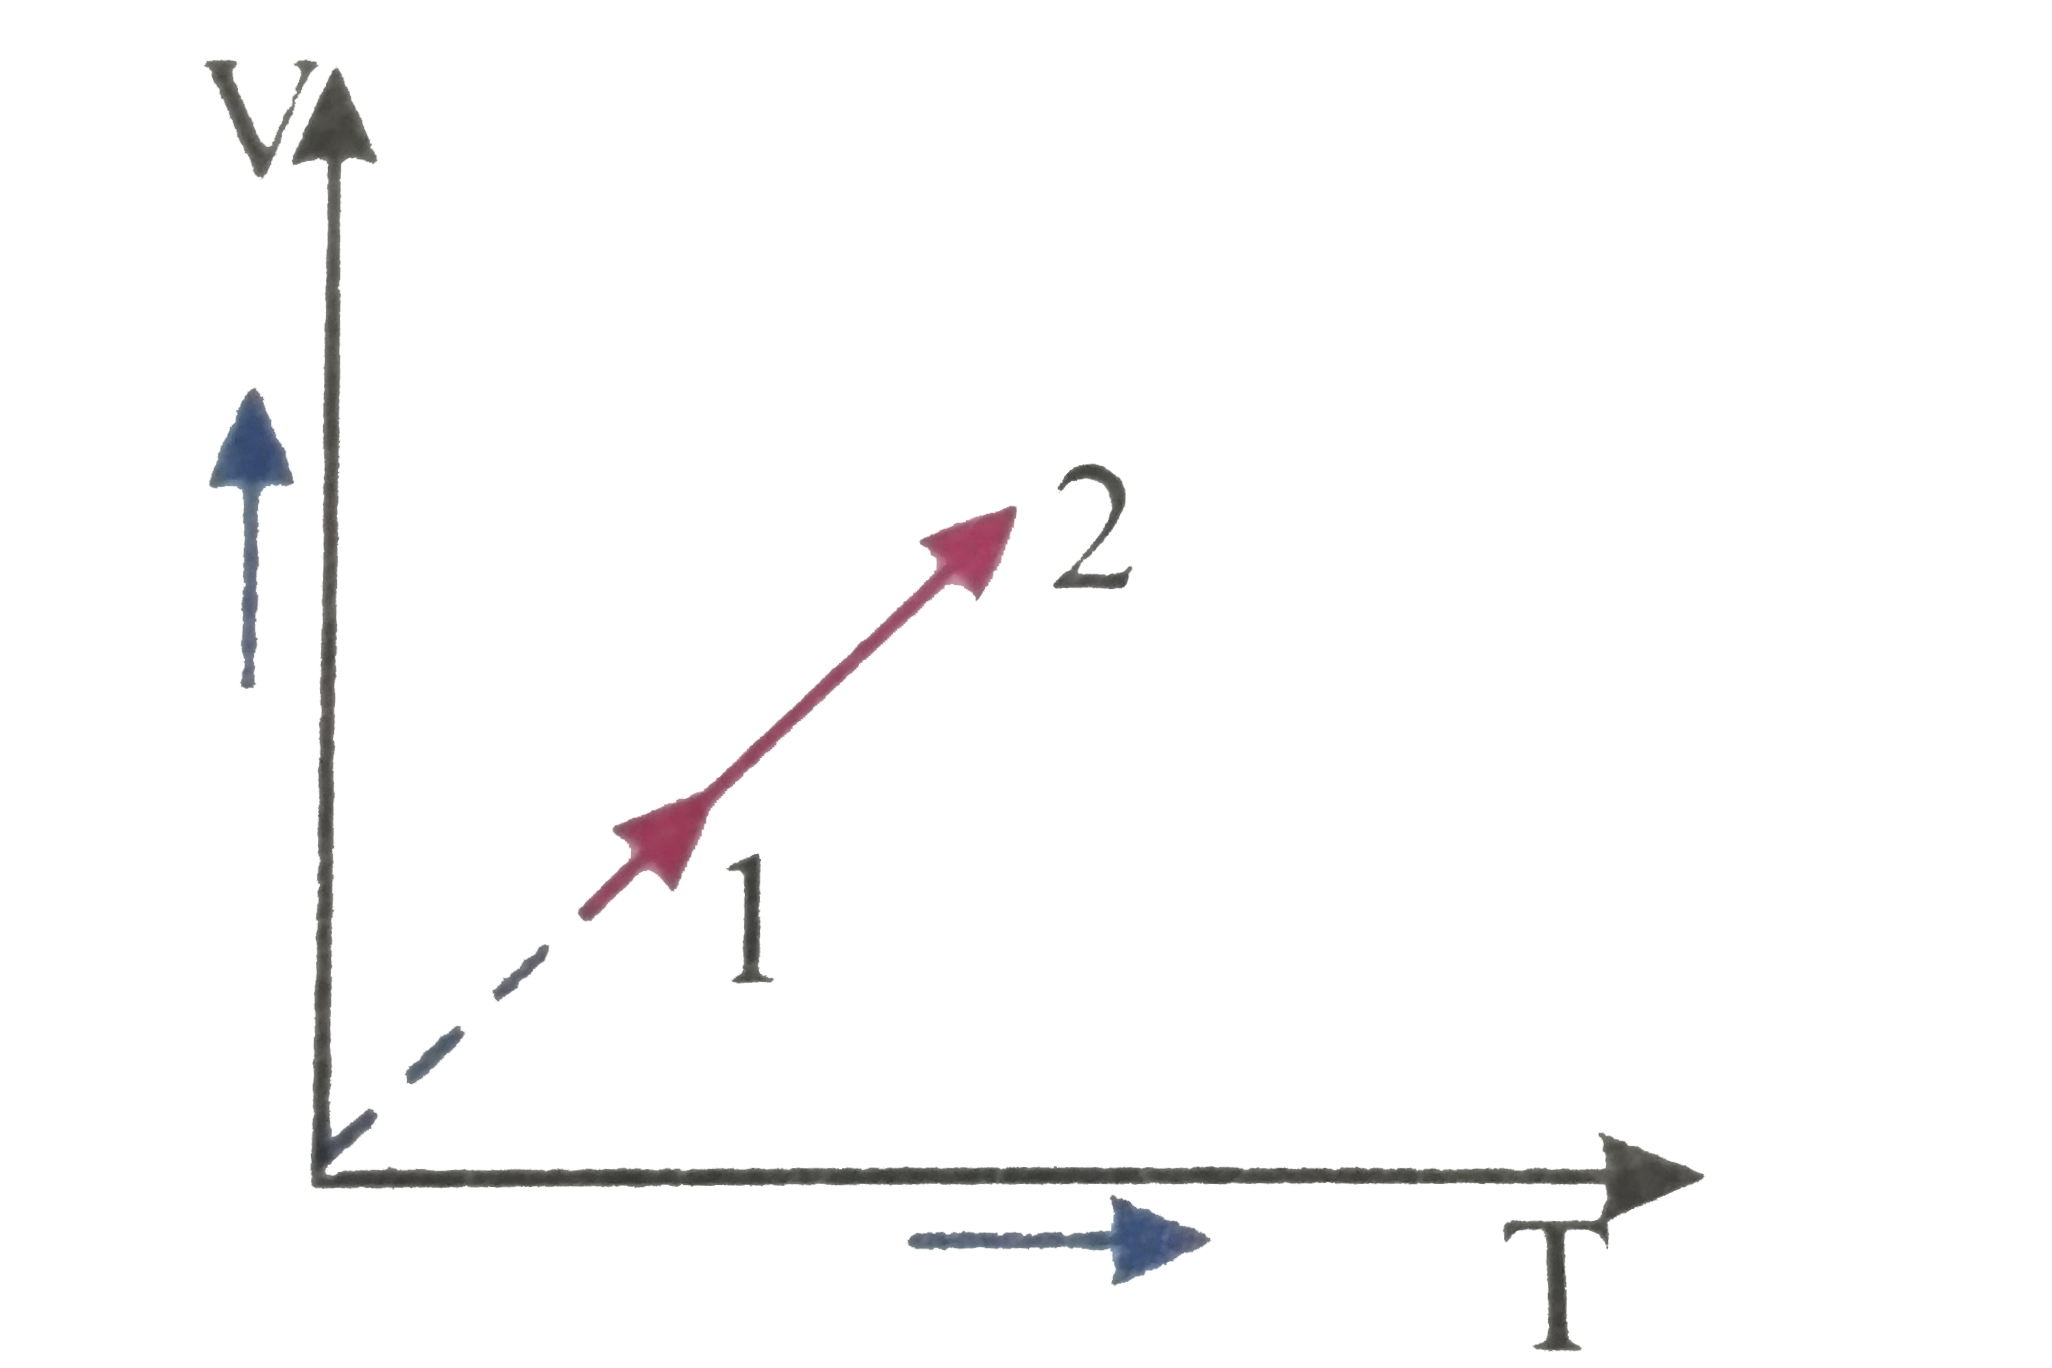 A volume V absolute temperature T diagram was obtained when a given mass of gas was heated. During the heating process from state 1 to 2, the pressure